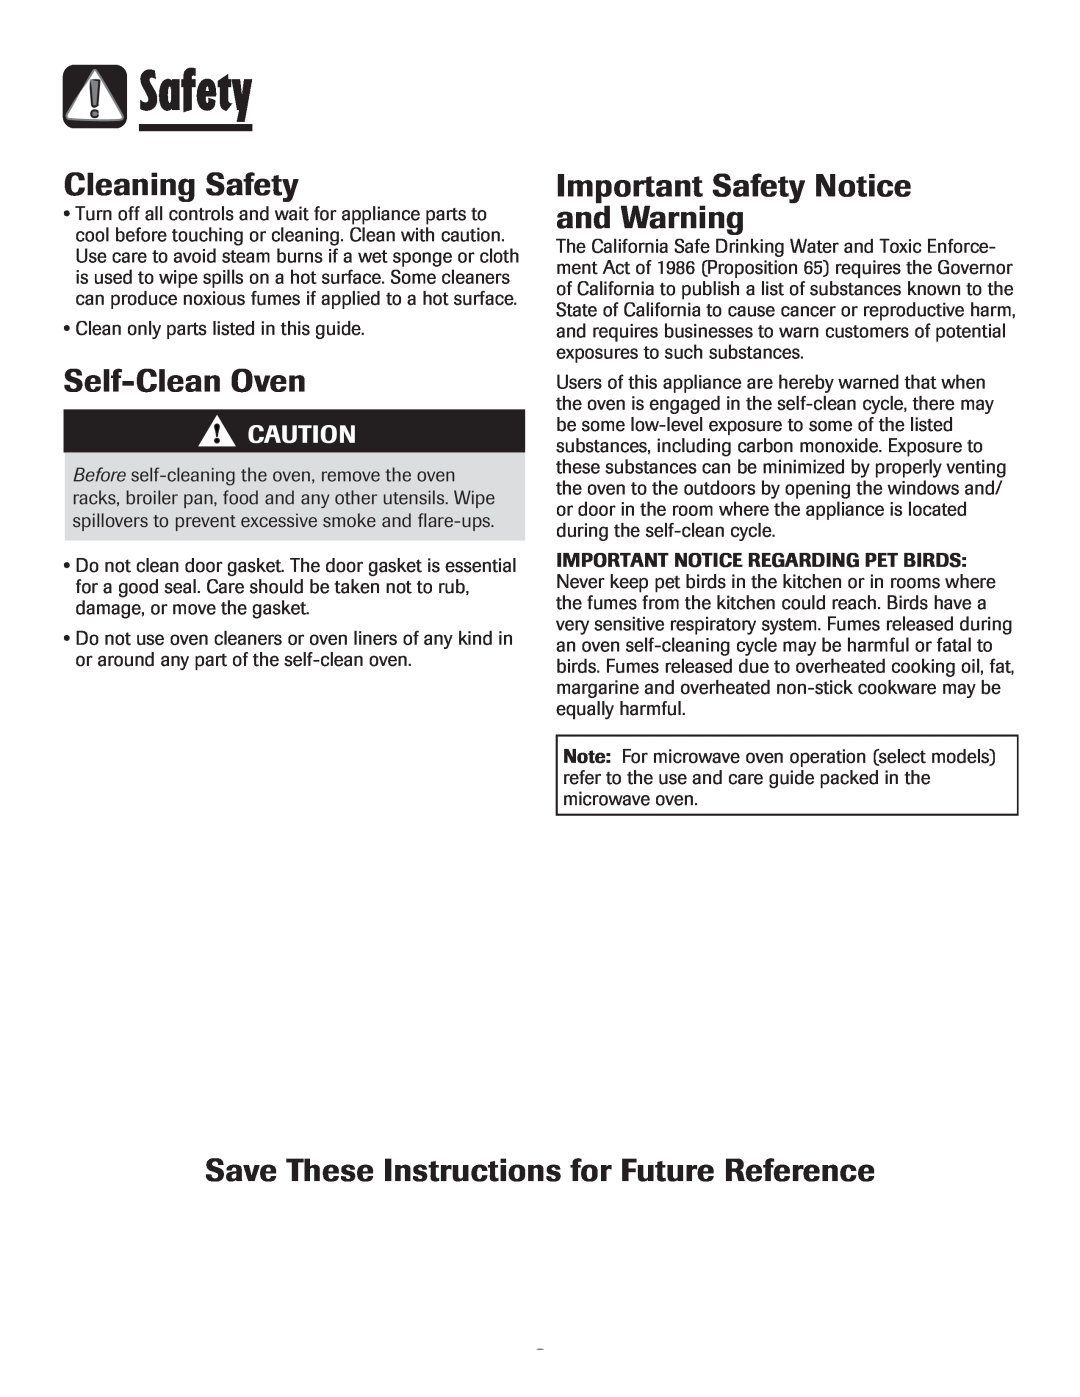 Maytag MEW6630DDW warranty Cleaning Safety, Self-Clean Oven, Important Safety Notice and Warning 